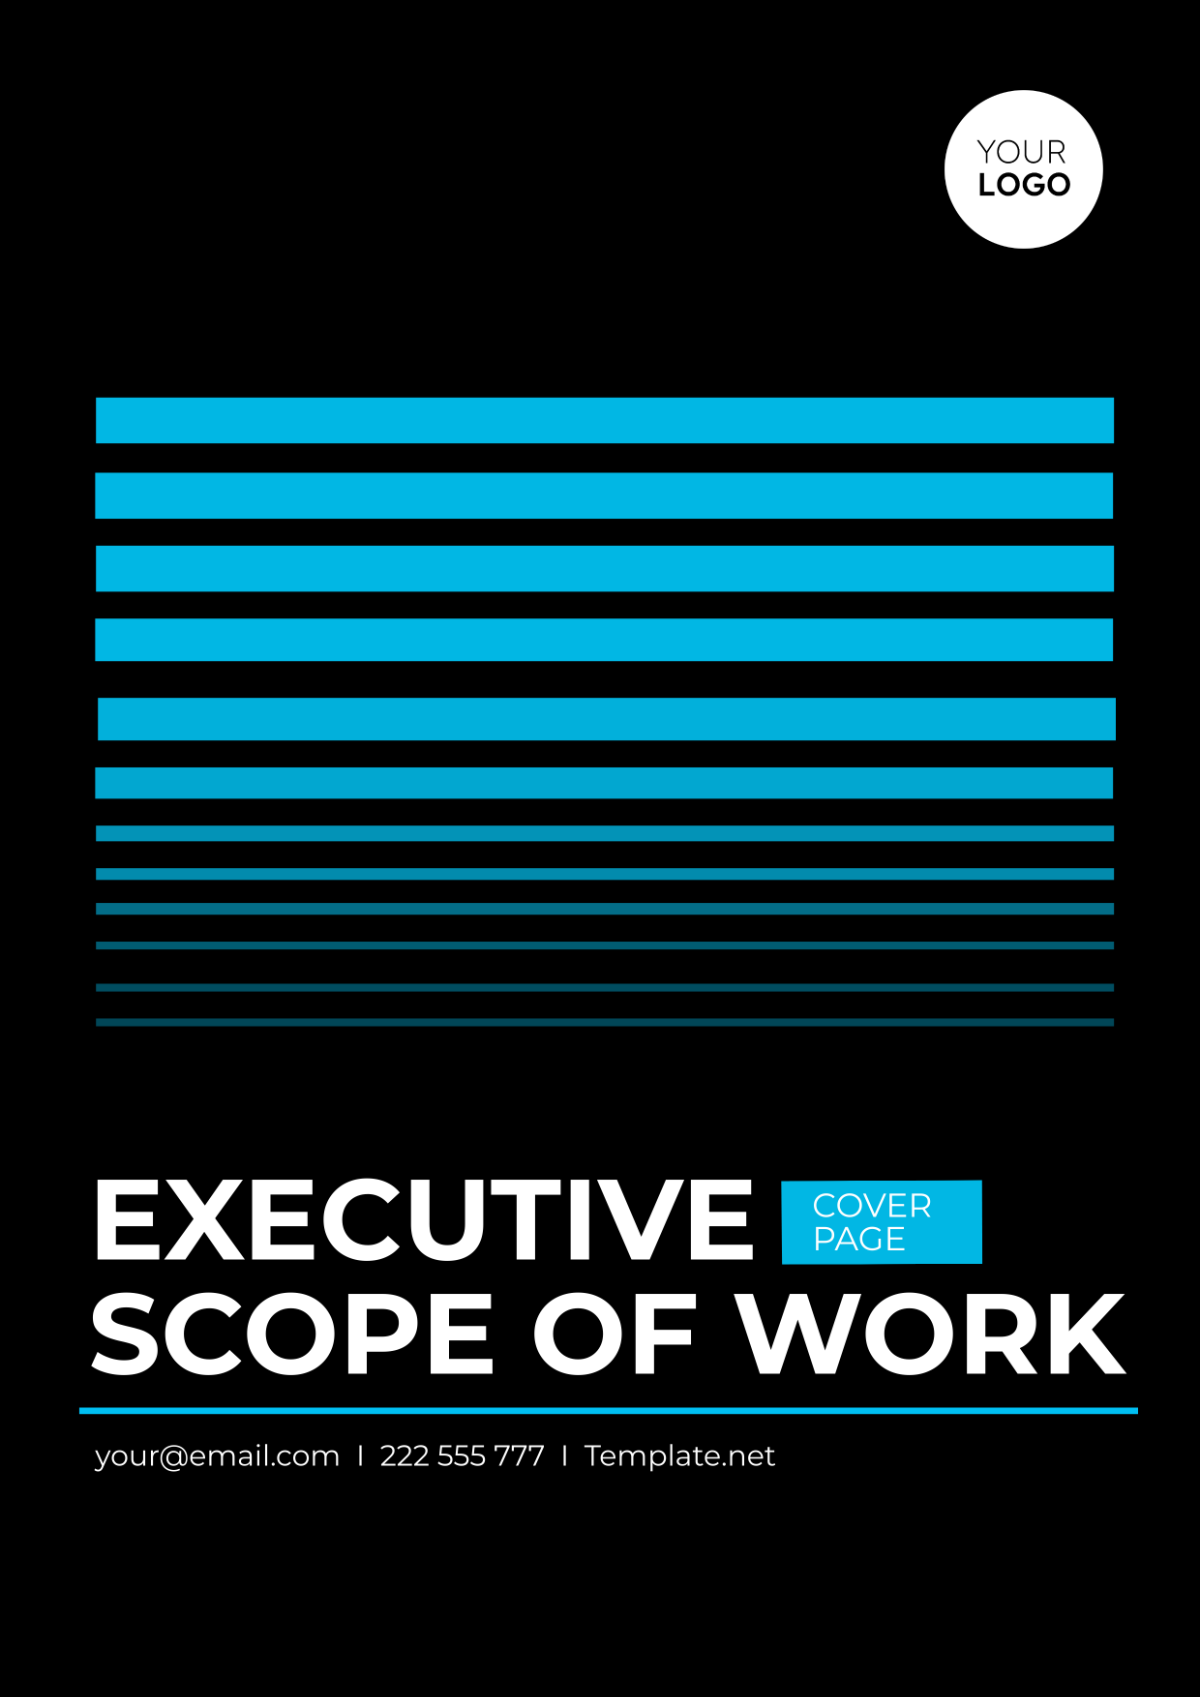 Executive Scope of Work Cover Page Template